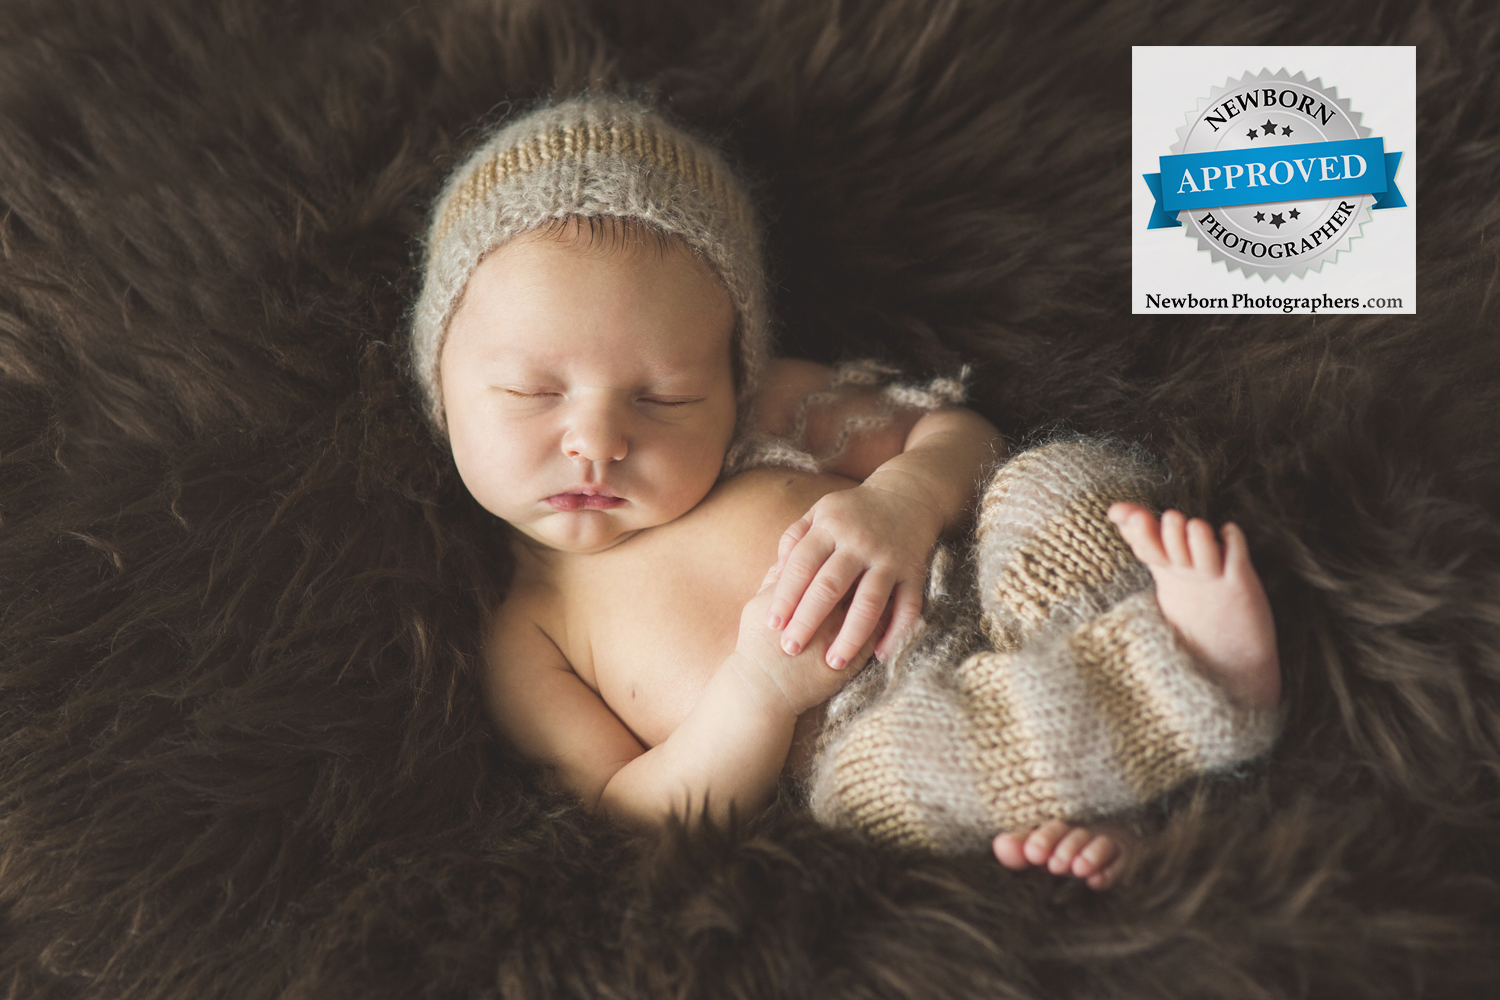 NEWBORN APPROVED PHOTOGRAPHER - ONE OF THE BEST NEWBORN PHOTOGRAPHERS IN POLAND